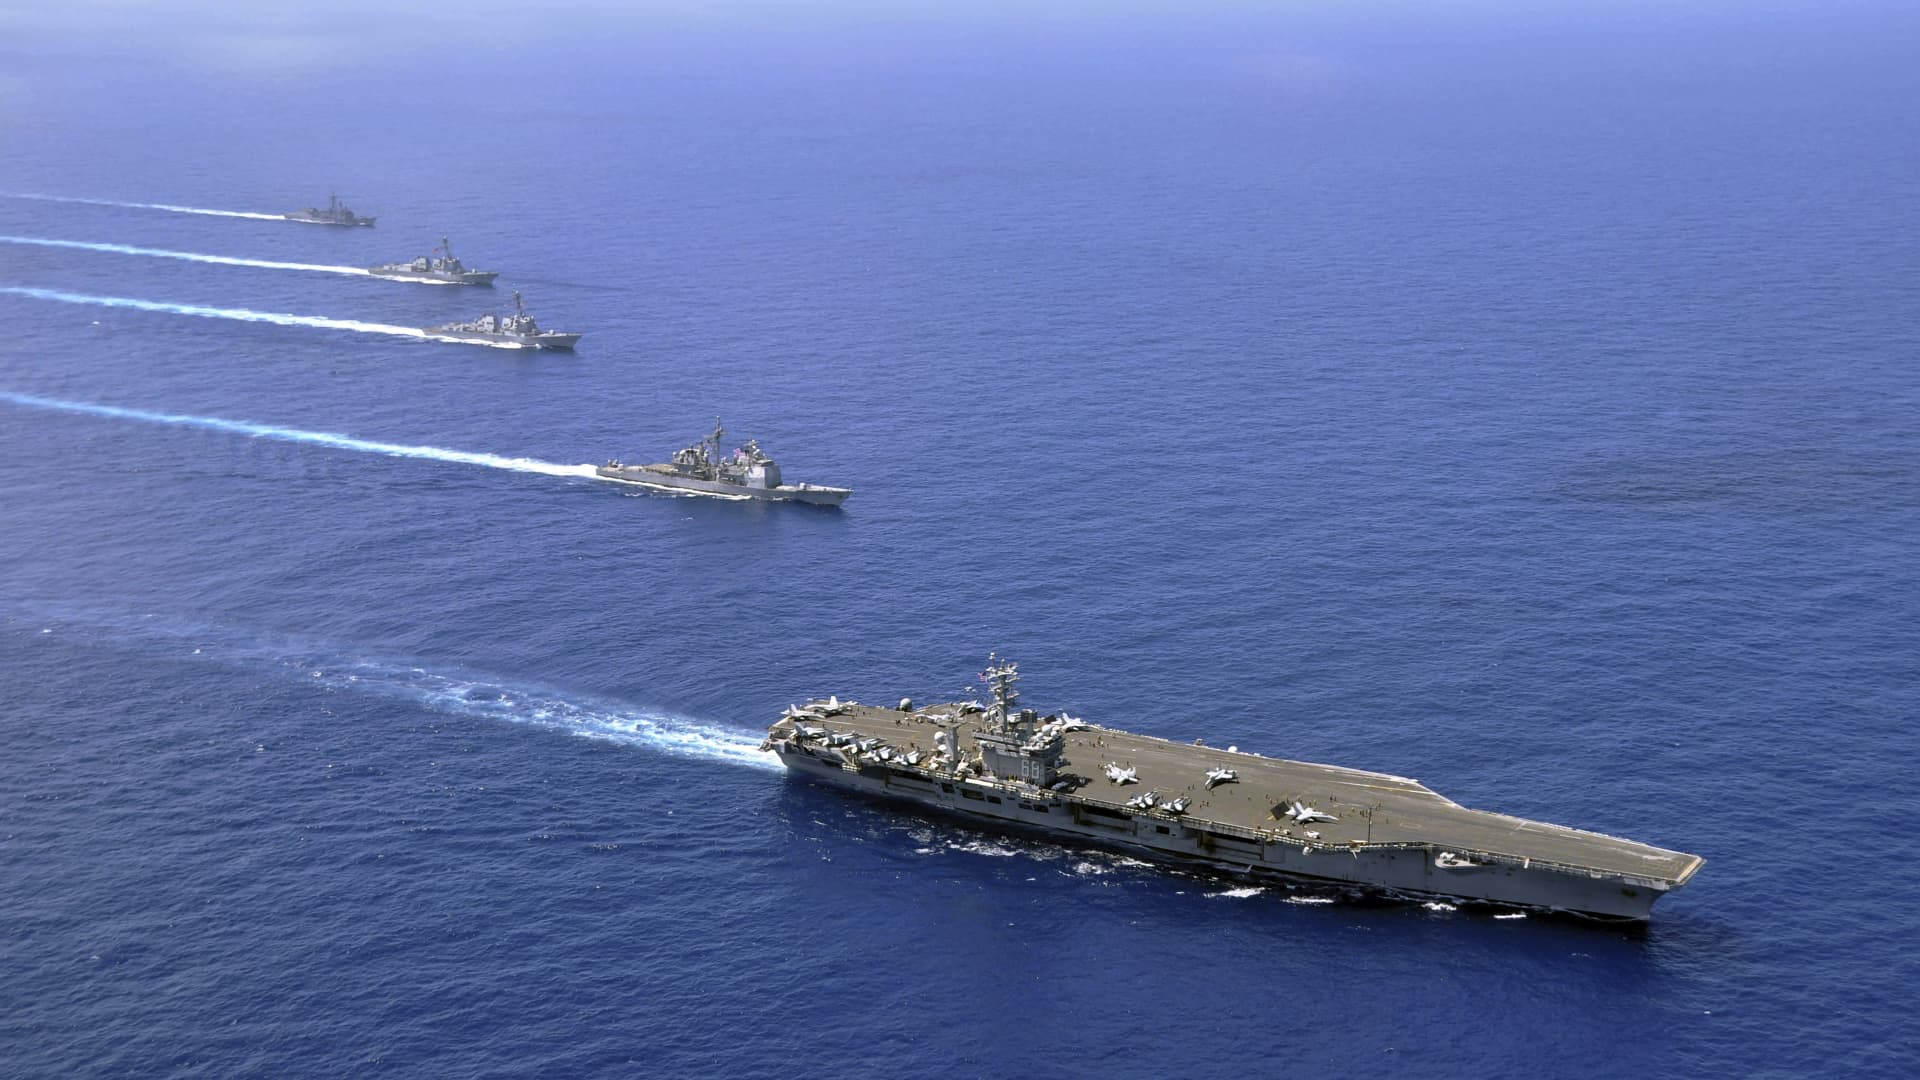 The Quad’s new maritime initiative has potential to spur militarization of the Indo-Pacific